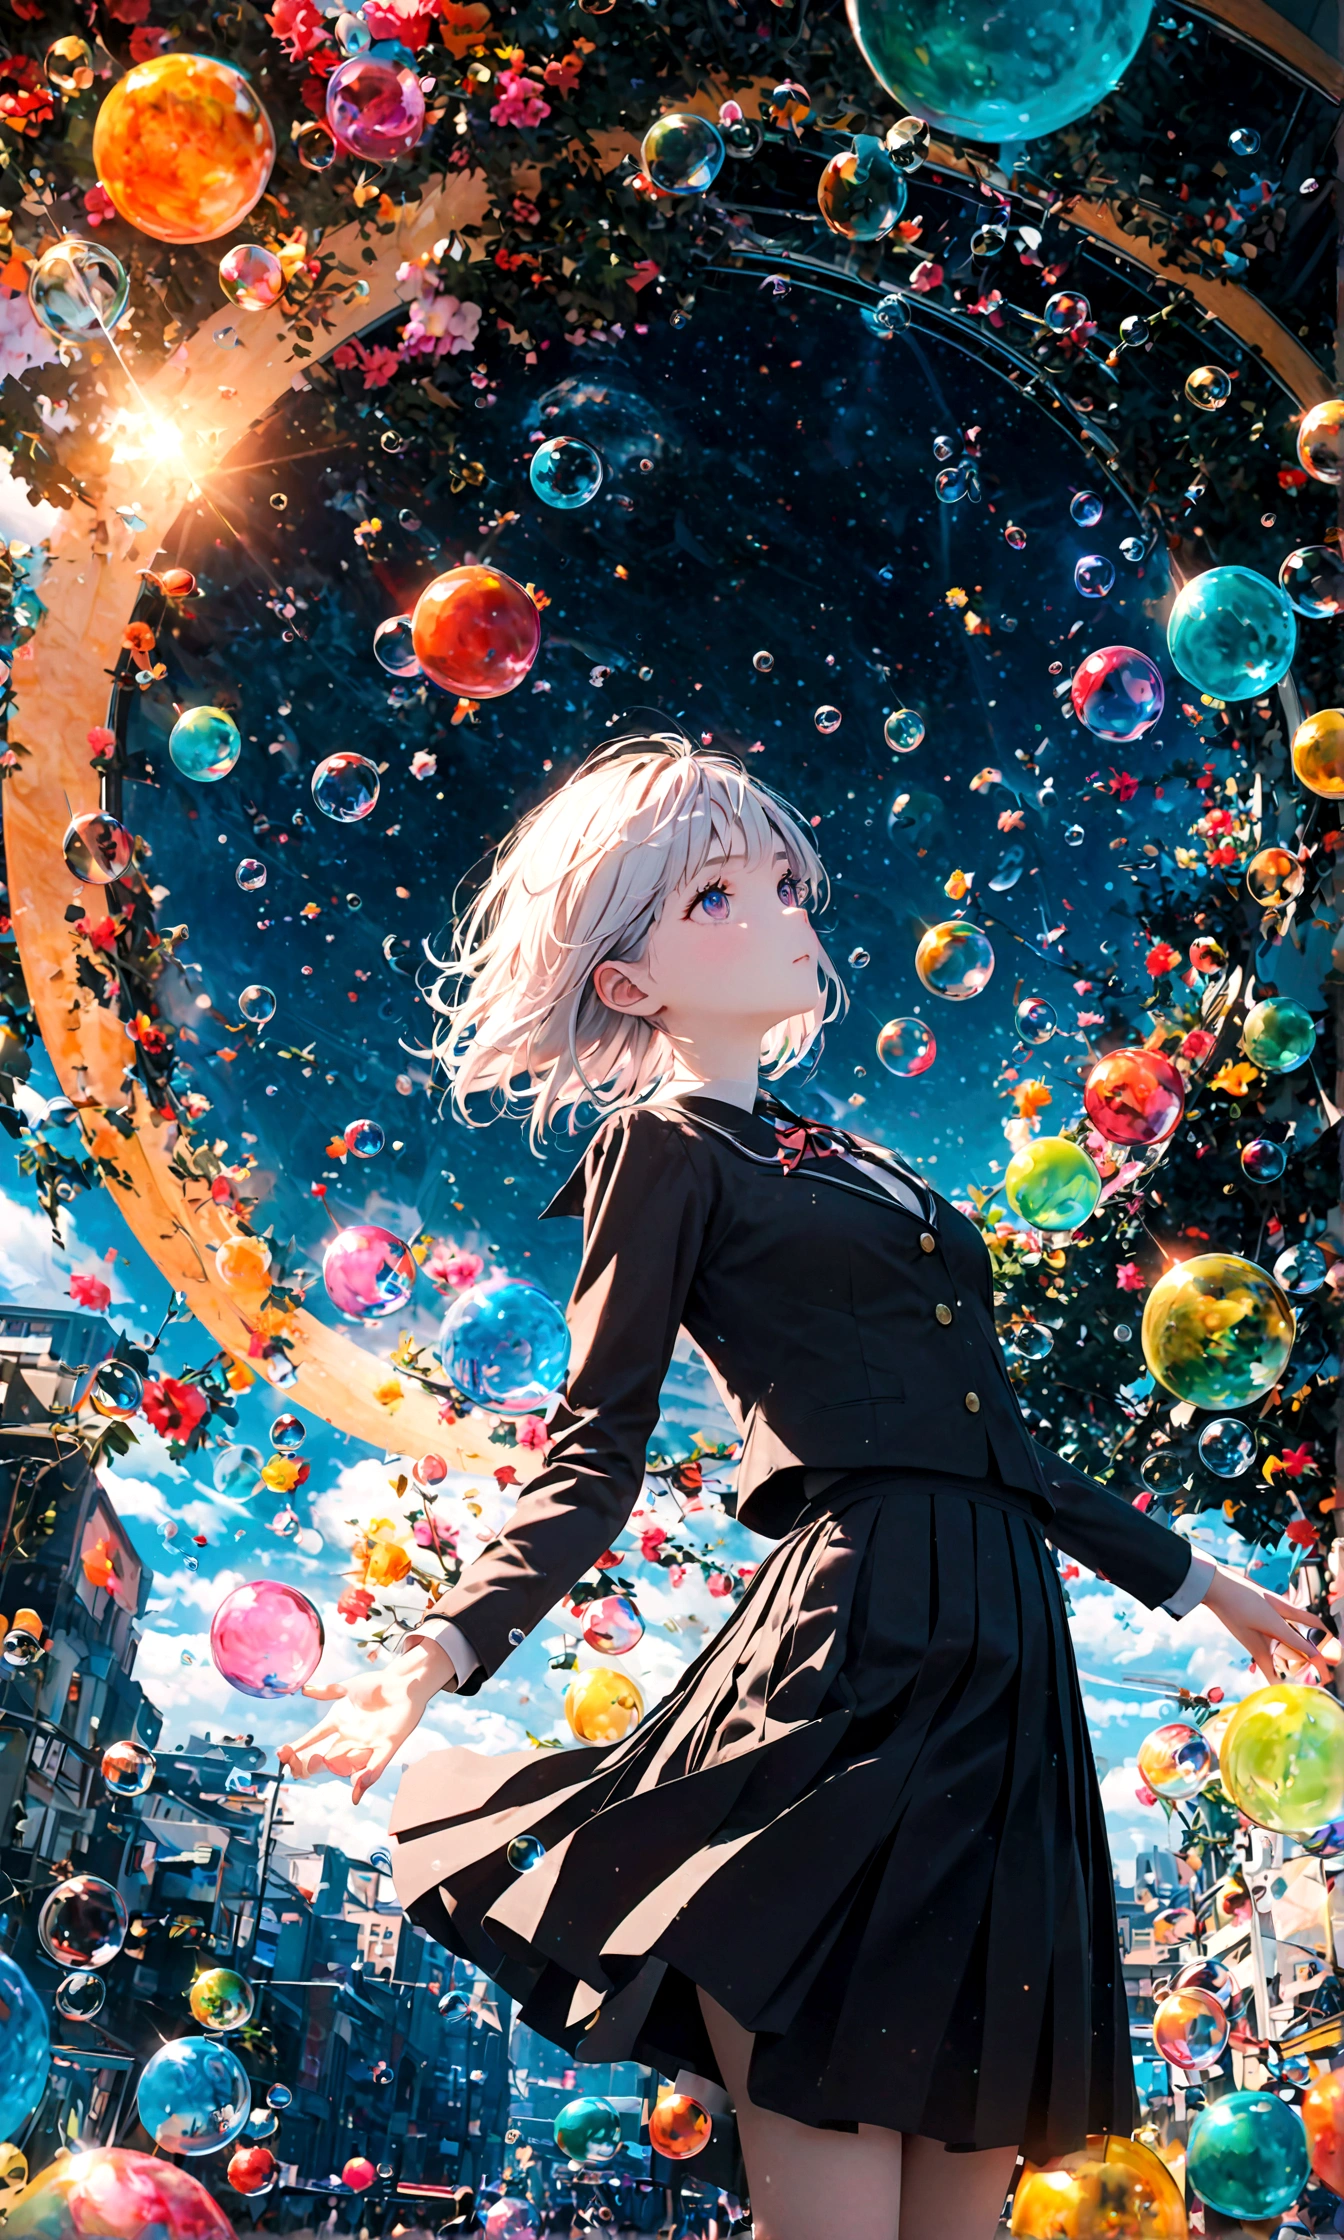 (woman\(student, 20-year-old, ＪＫ, Short silver hair floating, Space-colored eyes, school black uniform, Pale skin) Looking up at the sky), (A large glass-colored whale swims in the air), Beautiful sky, Beautiful Clouds, Colorful summer flowers are blooming everywhere., (Transparent bubbles shine like prisms here and there in the sky), There is a noon moon and a noon star in the sky, In a crowded downtown, BREAK ,quality\(8K,Highly detailed CG unit wallpaper, masterpiece,High resolution,top-quality,top-quality real texture skin,surreal,Increase the resolution,RAW Photos,highest quality,Very detailed,wallpaper,Cinema Lighting,Ray-tracing,Golden Ratio\),(Long Shot),Wide Shot,